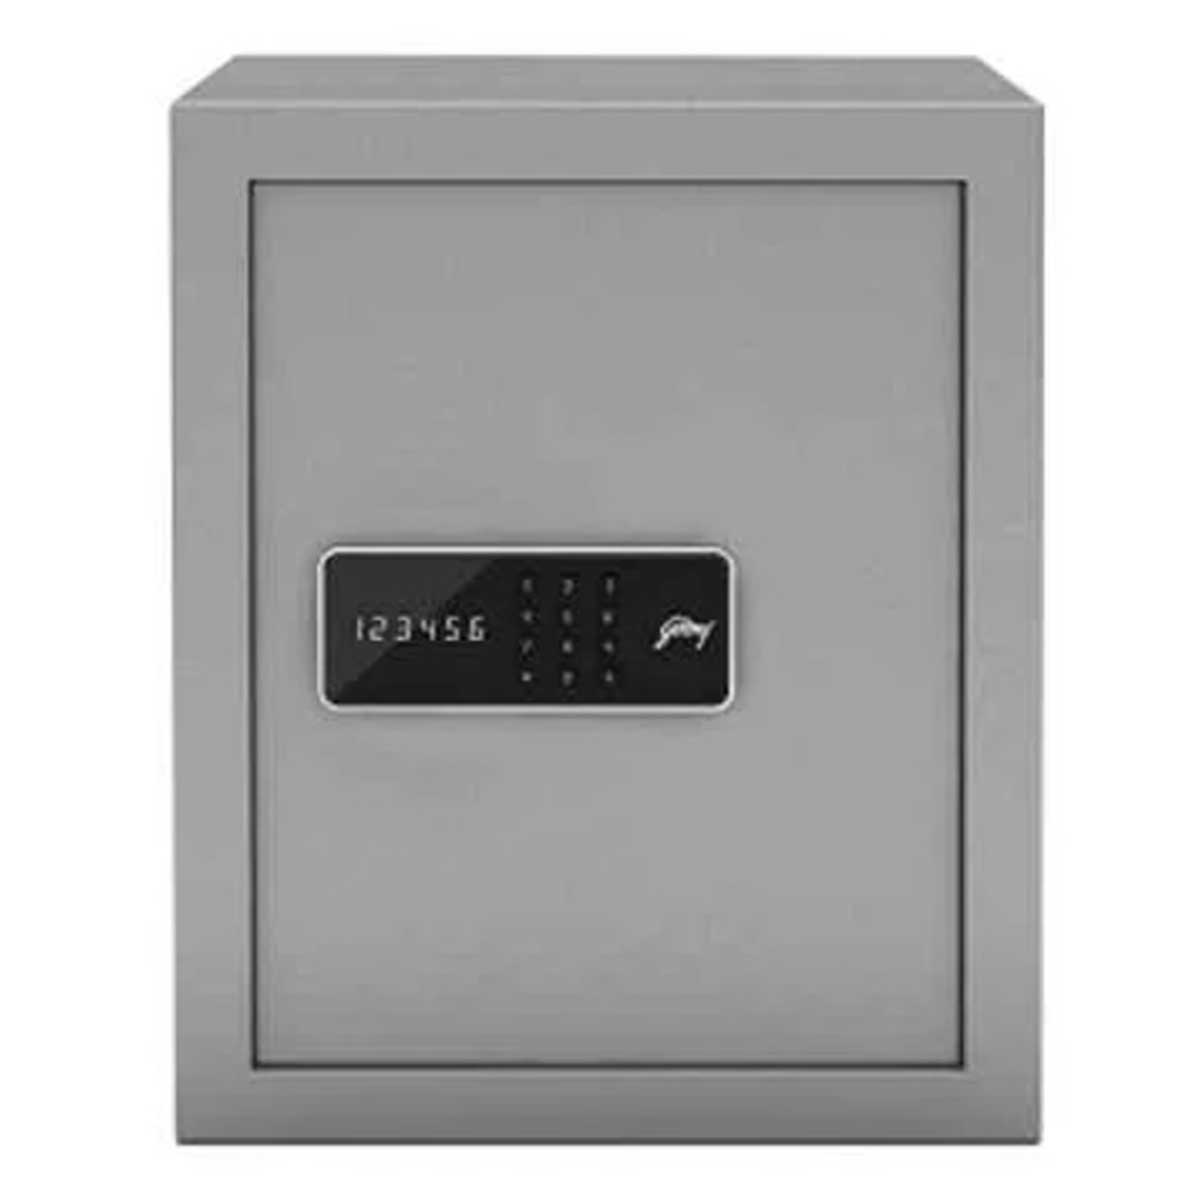 Steel security safe Manufacturers, Suppliers in Lodi Road